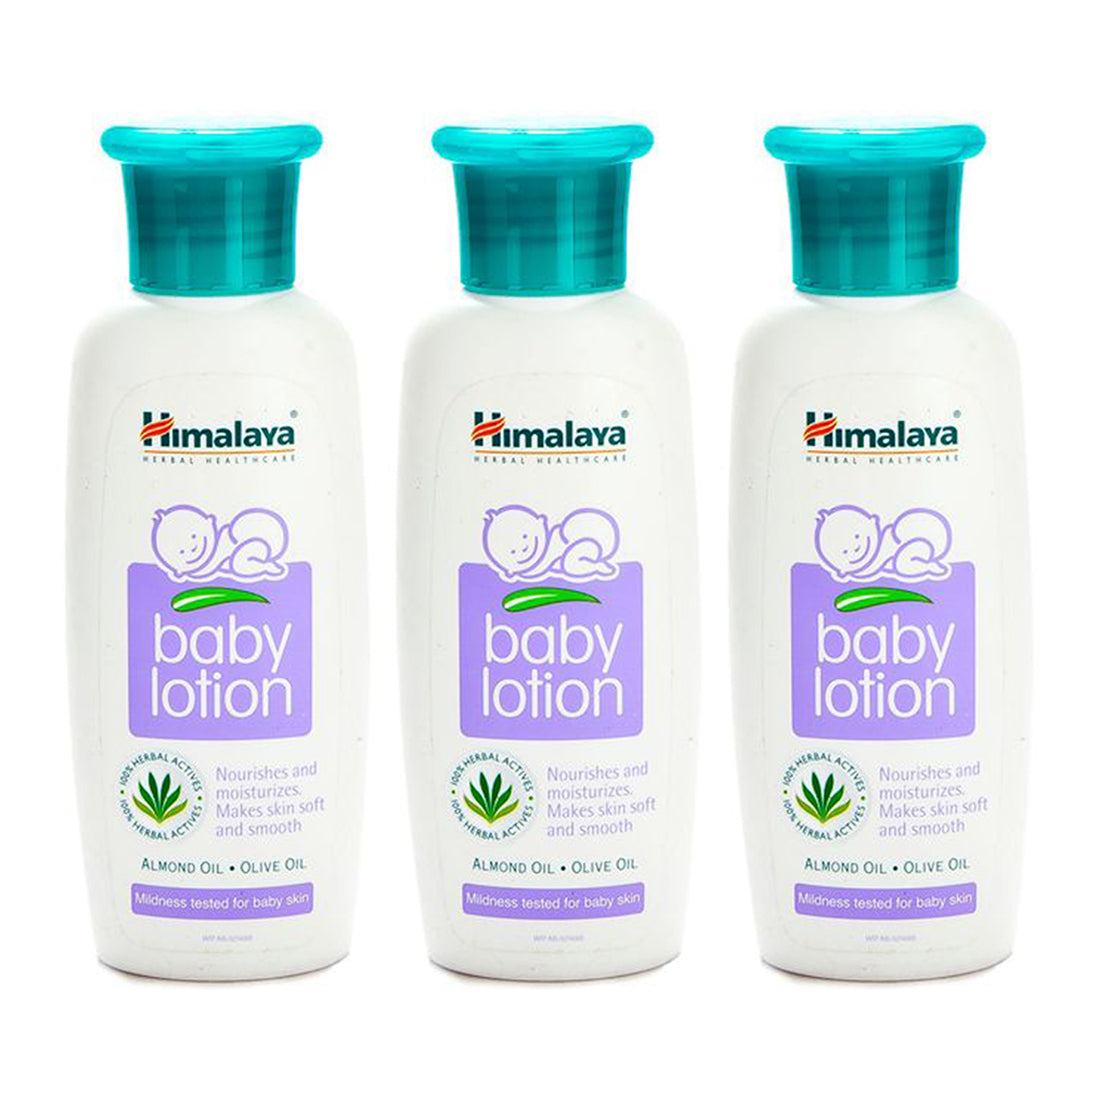 Himalaya Baby Lotion Skin Soft And Smooth 100ml Pack Of 3